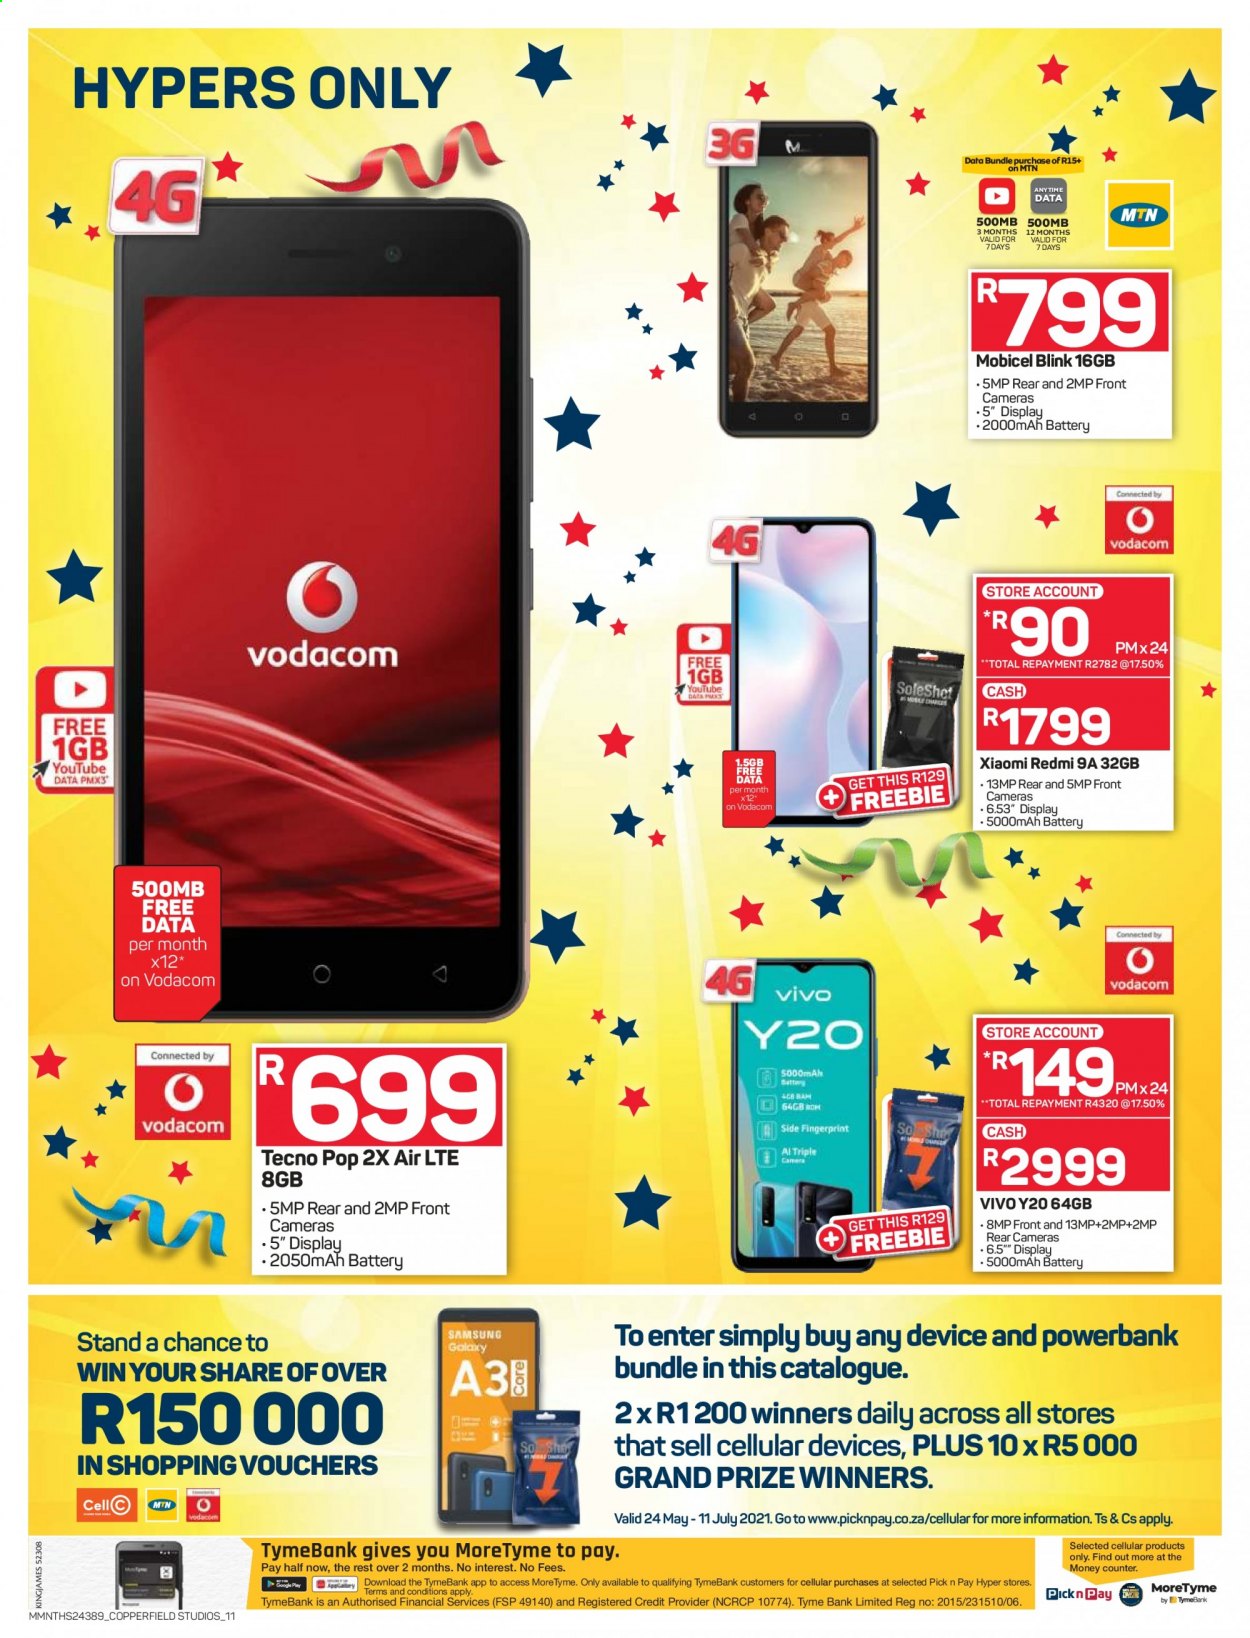 Pick n Pay specials - 05.24.2021 - 07.11.2021. 